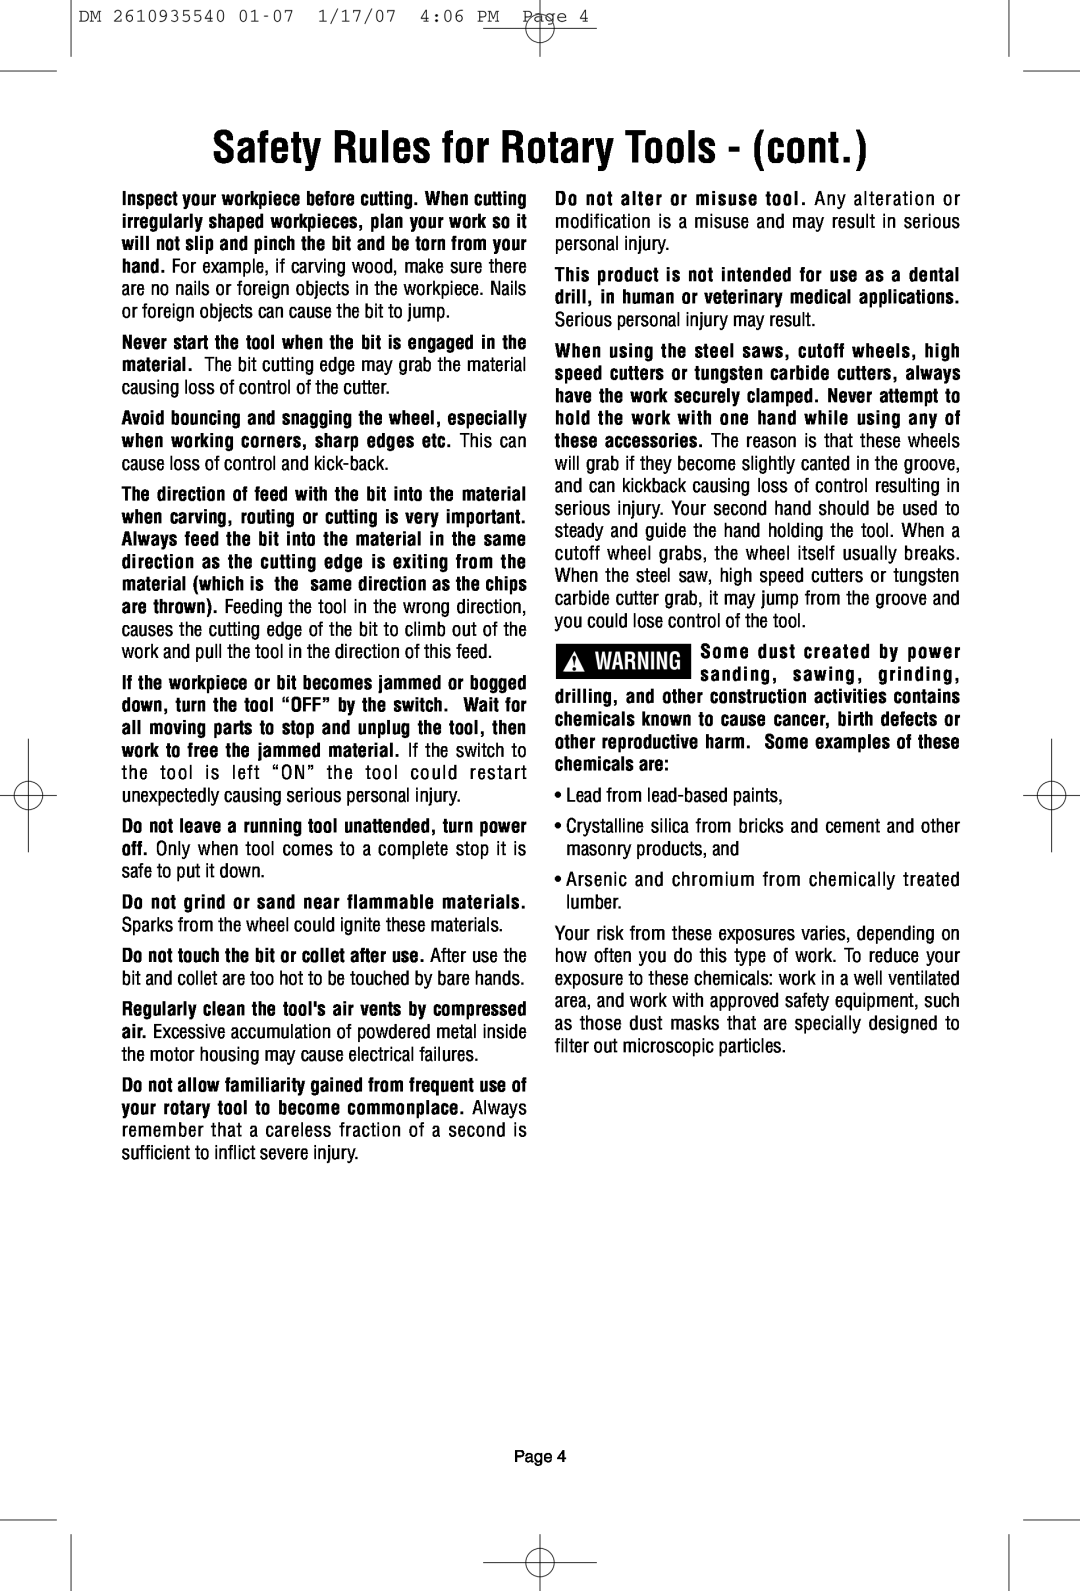 Dremel F013039519 owner manual Safety Rules for Rotary Tools - cont, Lead from lead-based paints 